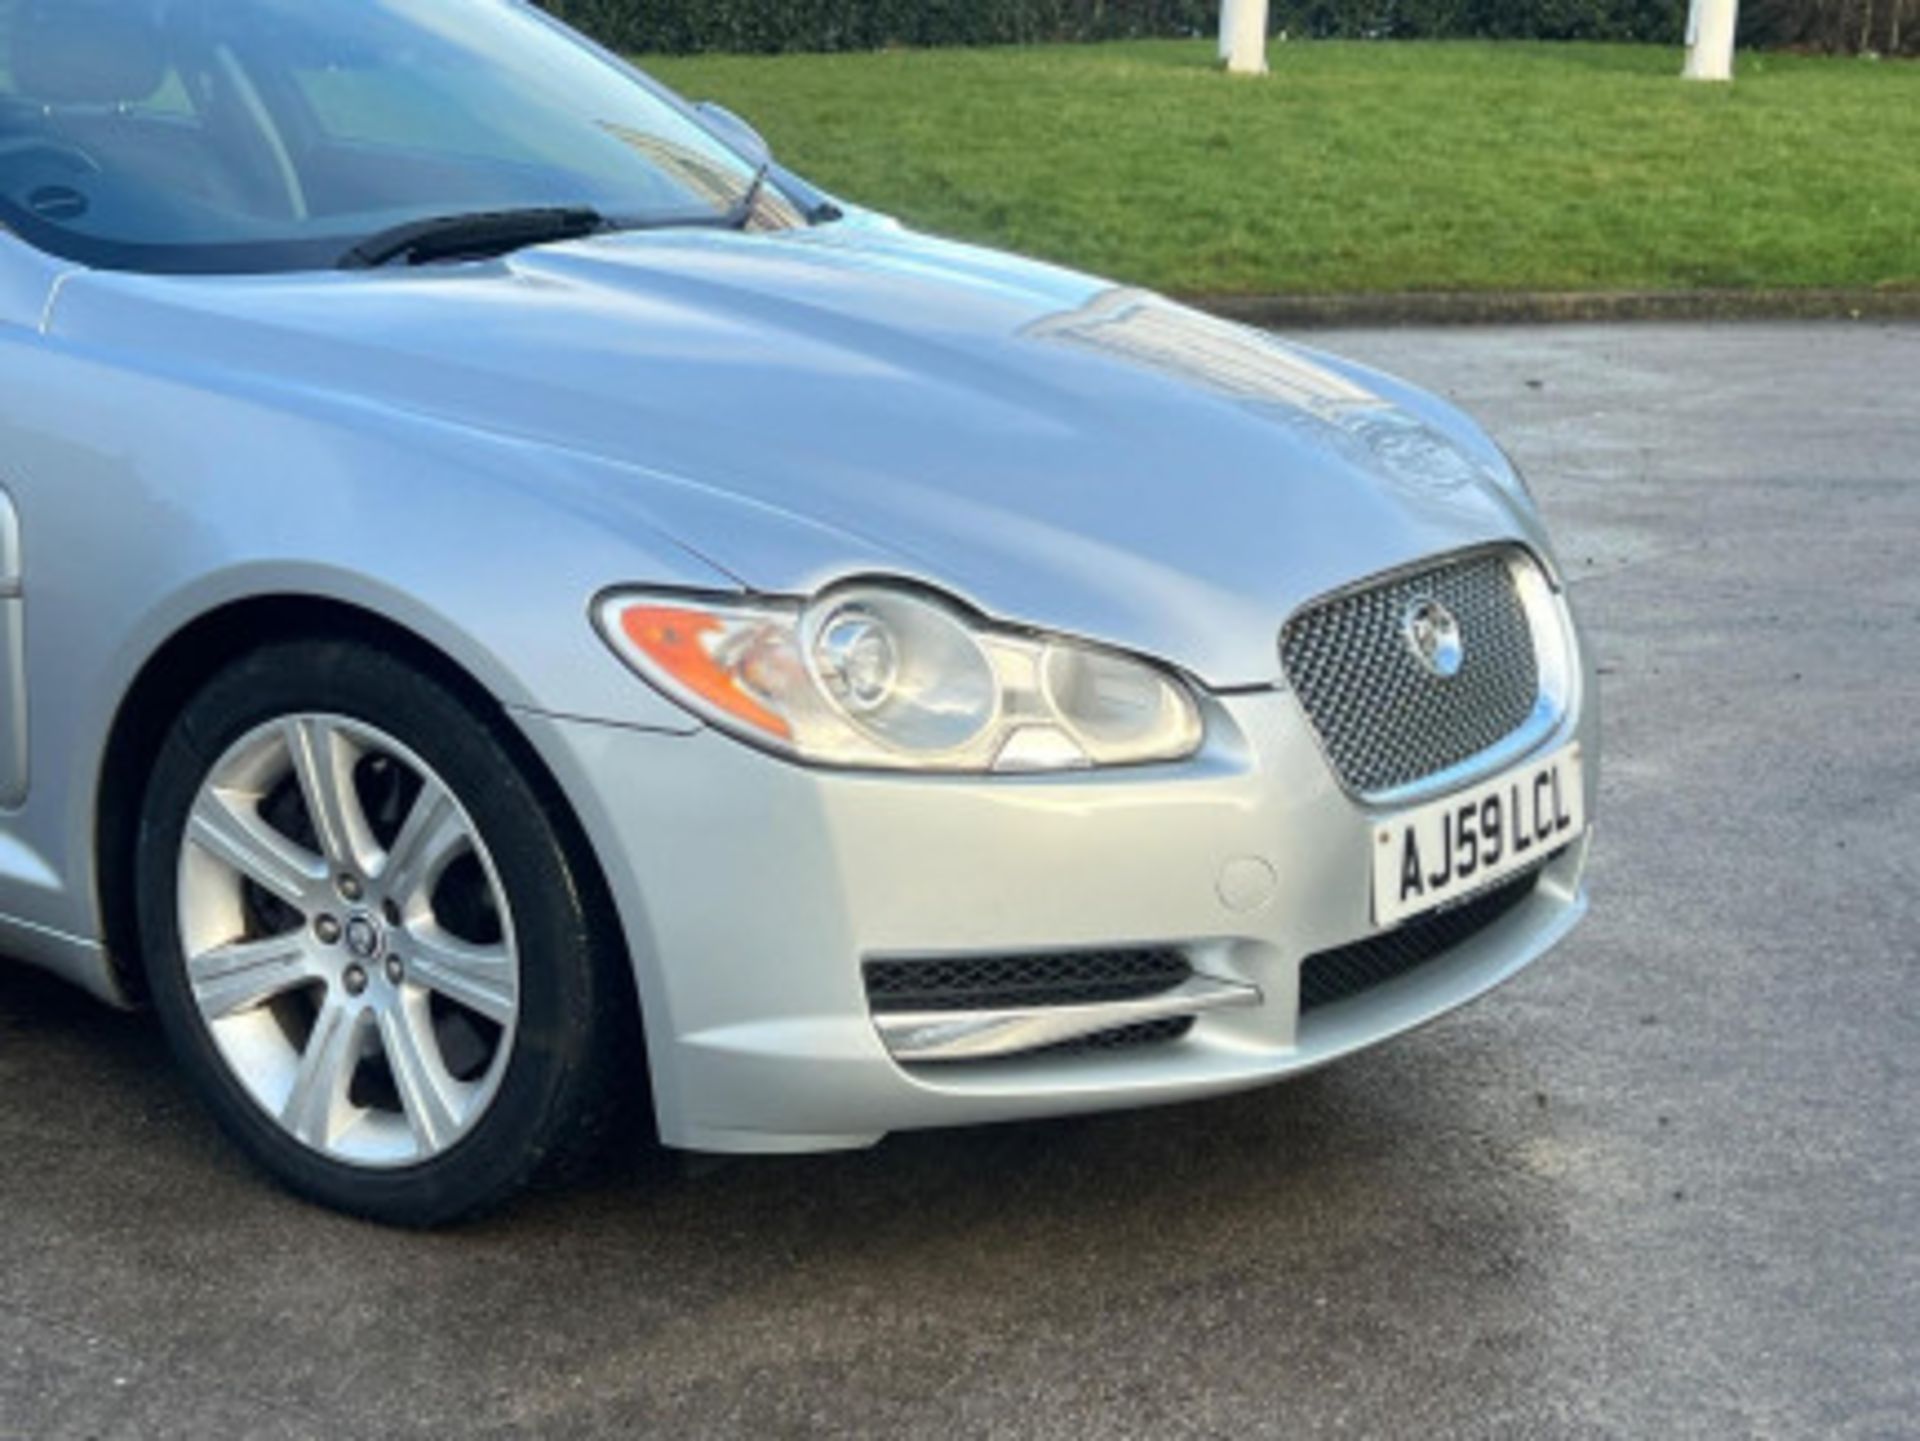 LUXURIOUS JAGUAR XF 3.0D V6 LUXURY 4DR AUTOMATIC SALOON >>--NO VAT ON HAMMER--<< - Image 45 of 118